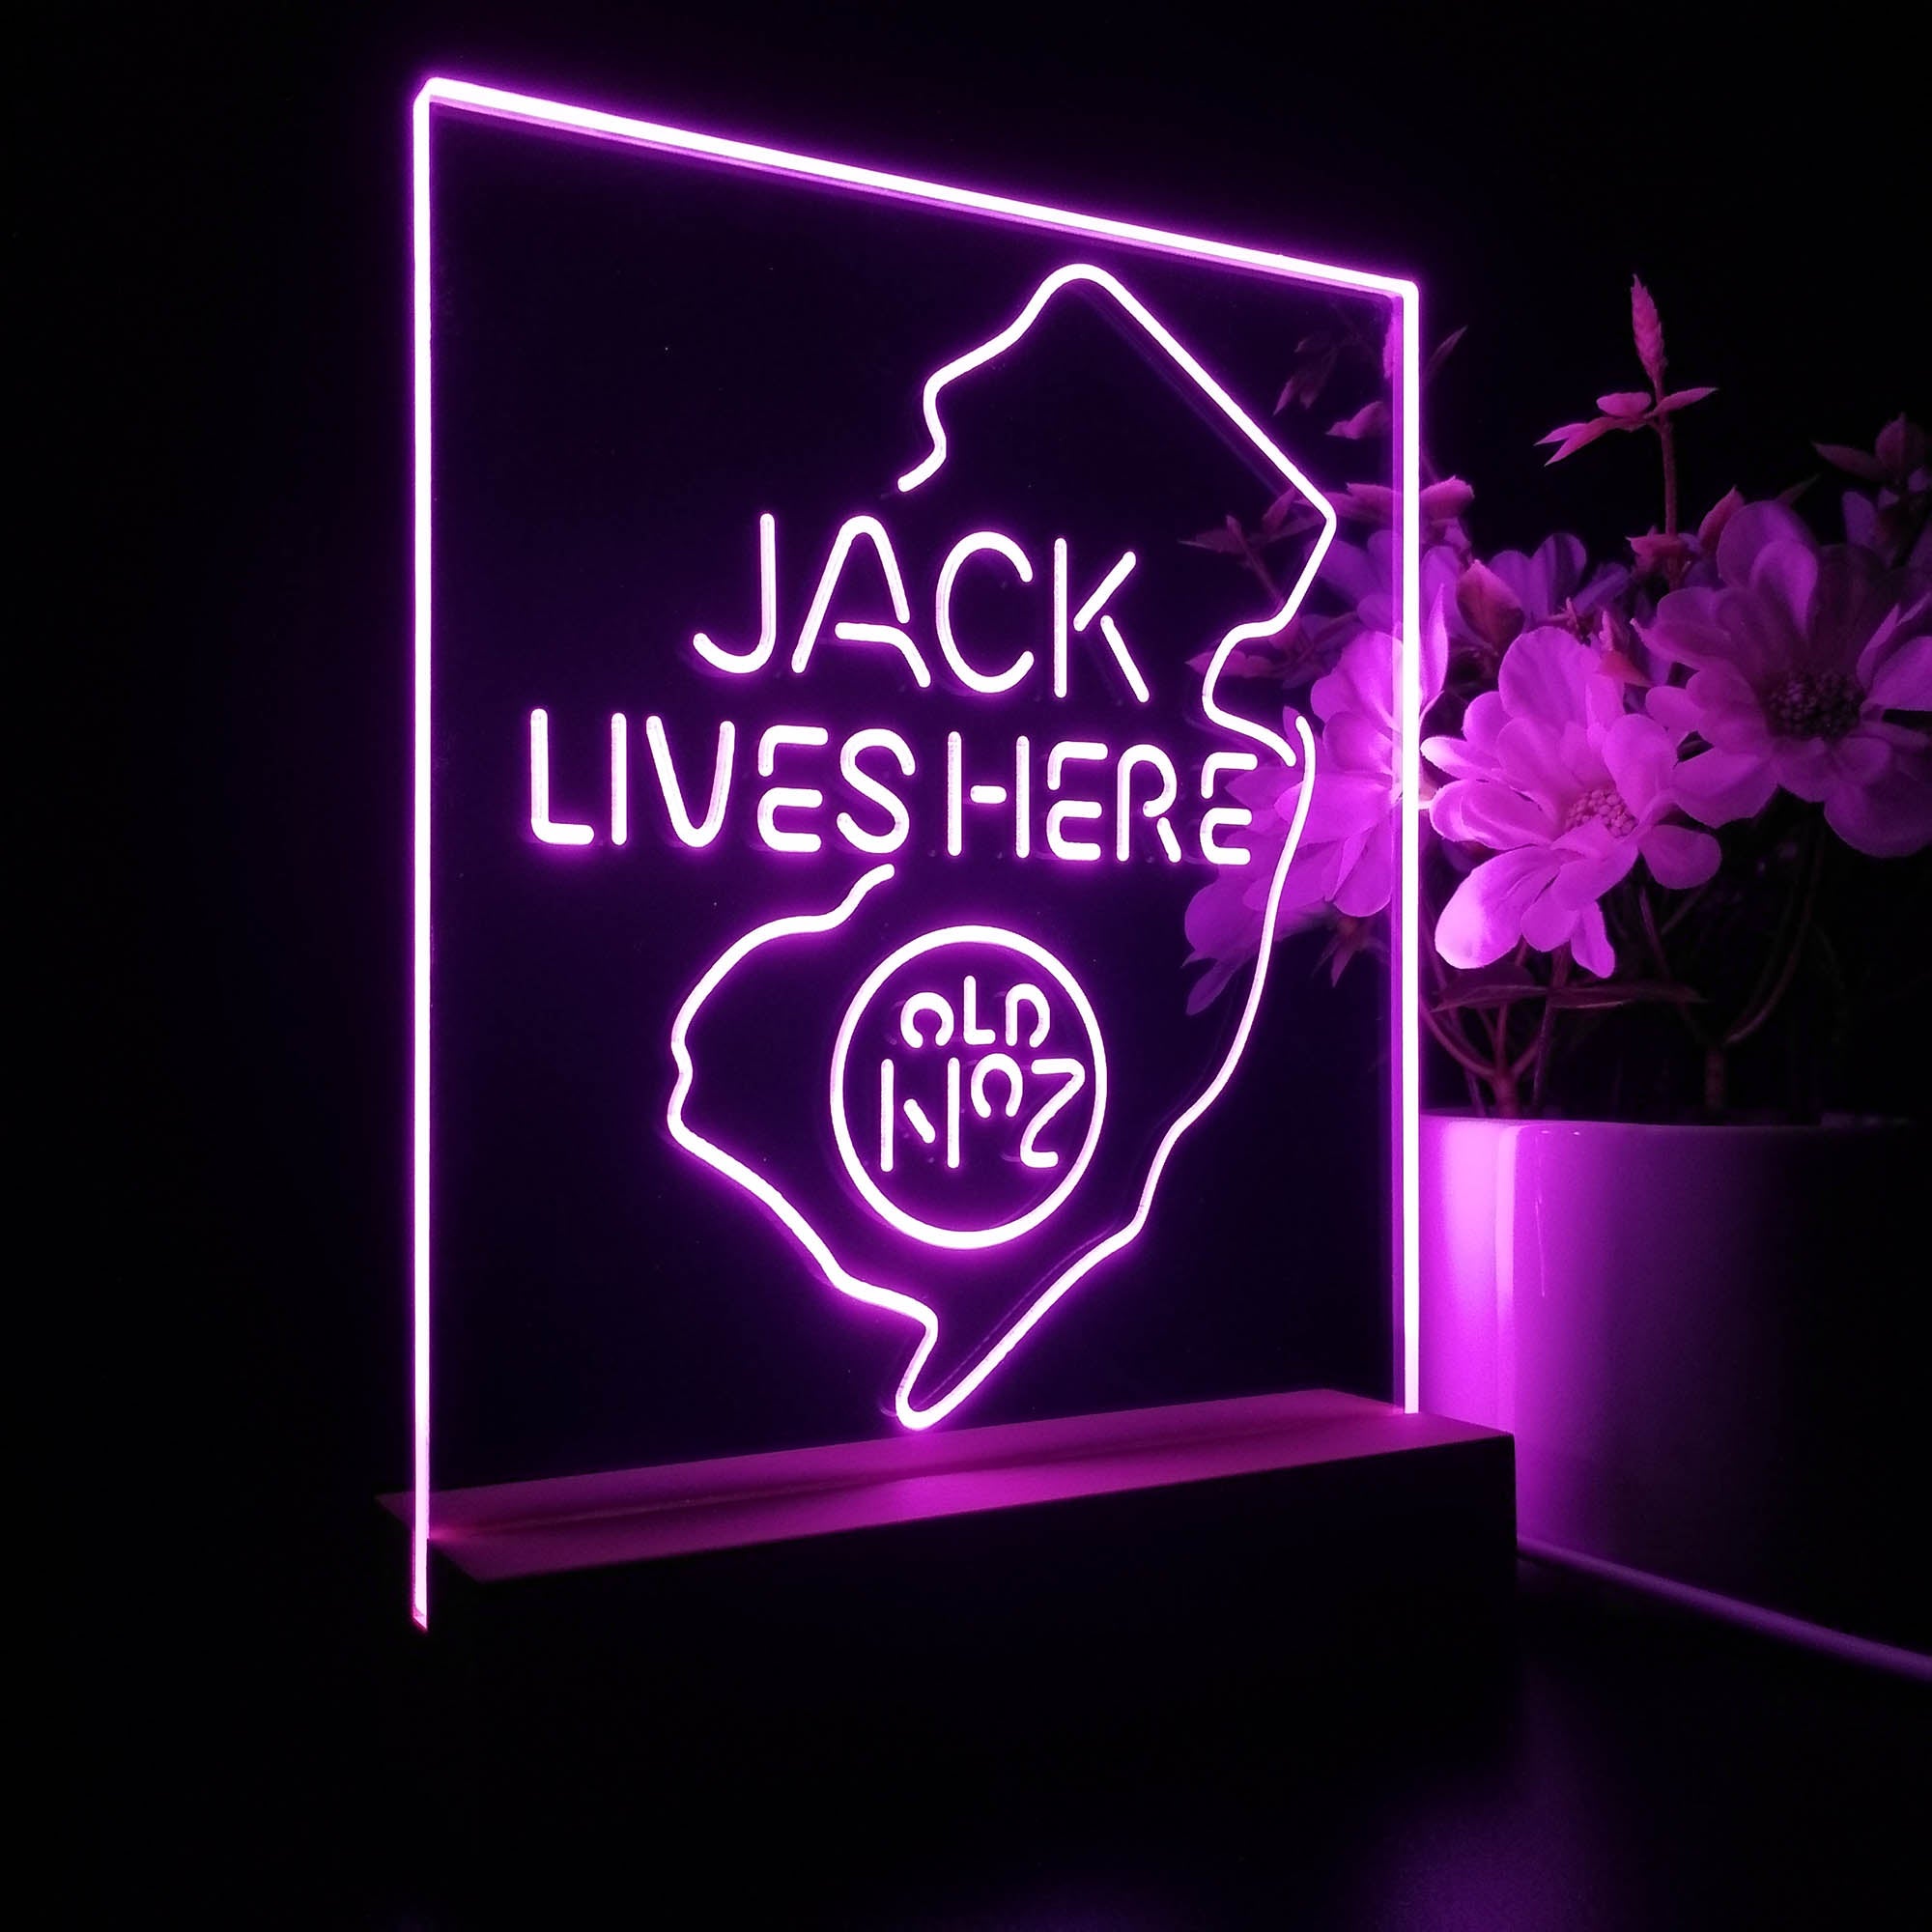 New Jersey Jack Lives Here 3D LED Illusion Night Light Table Lamp